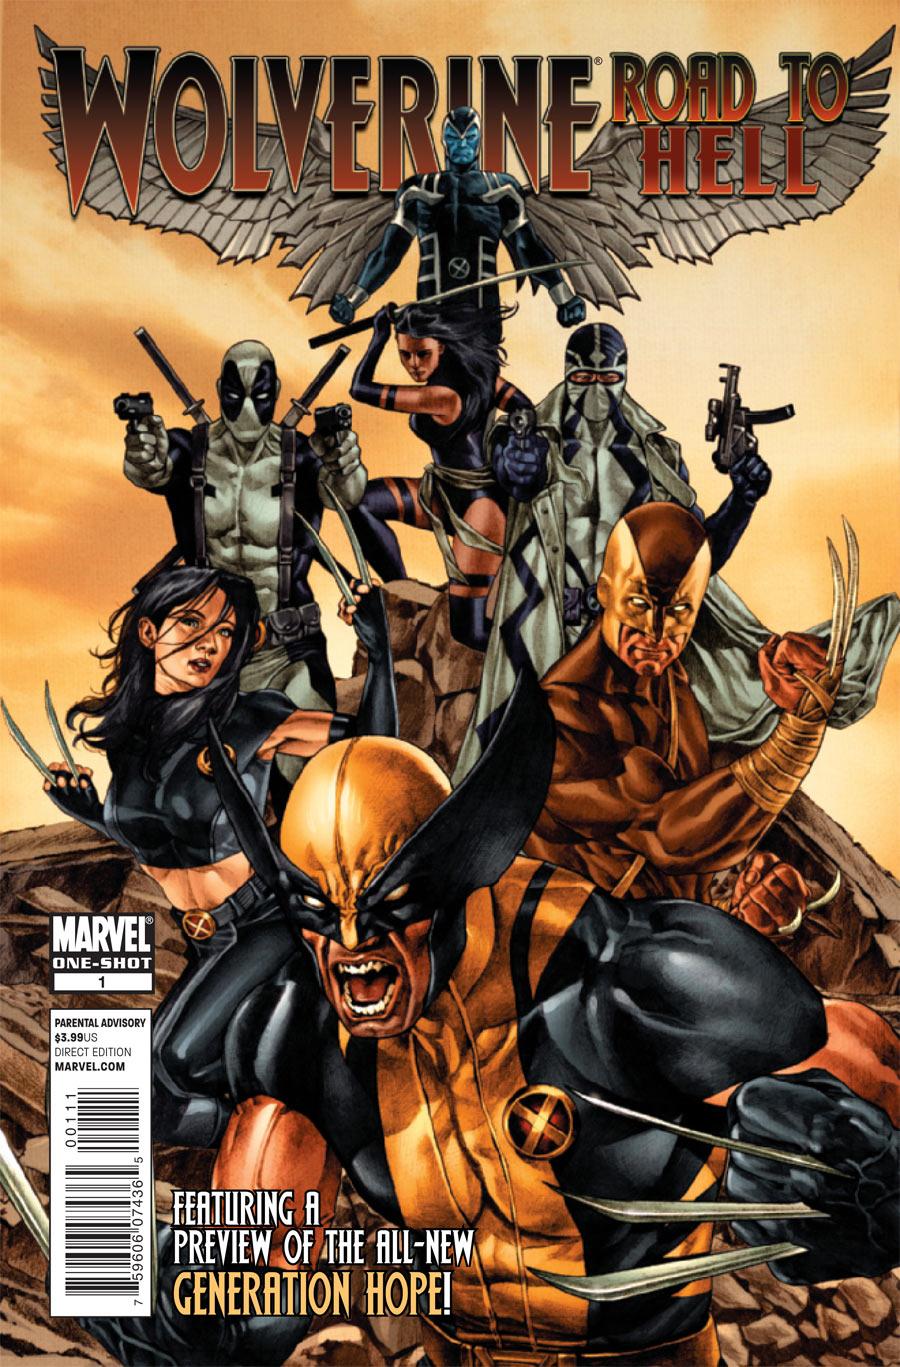 Wolverine: Road to Hell Vol. 1 #1